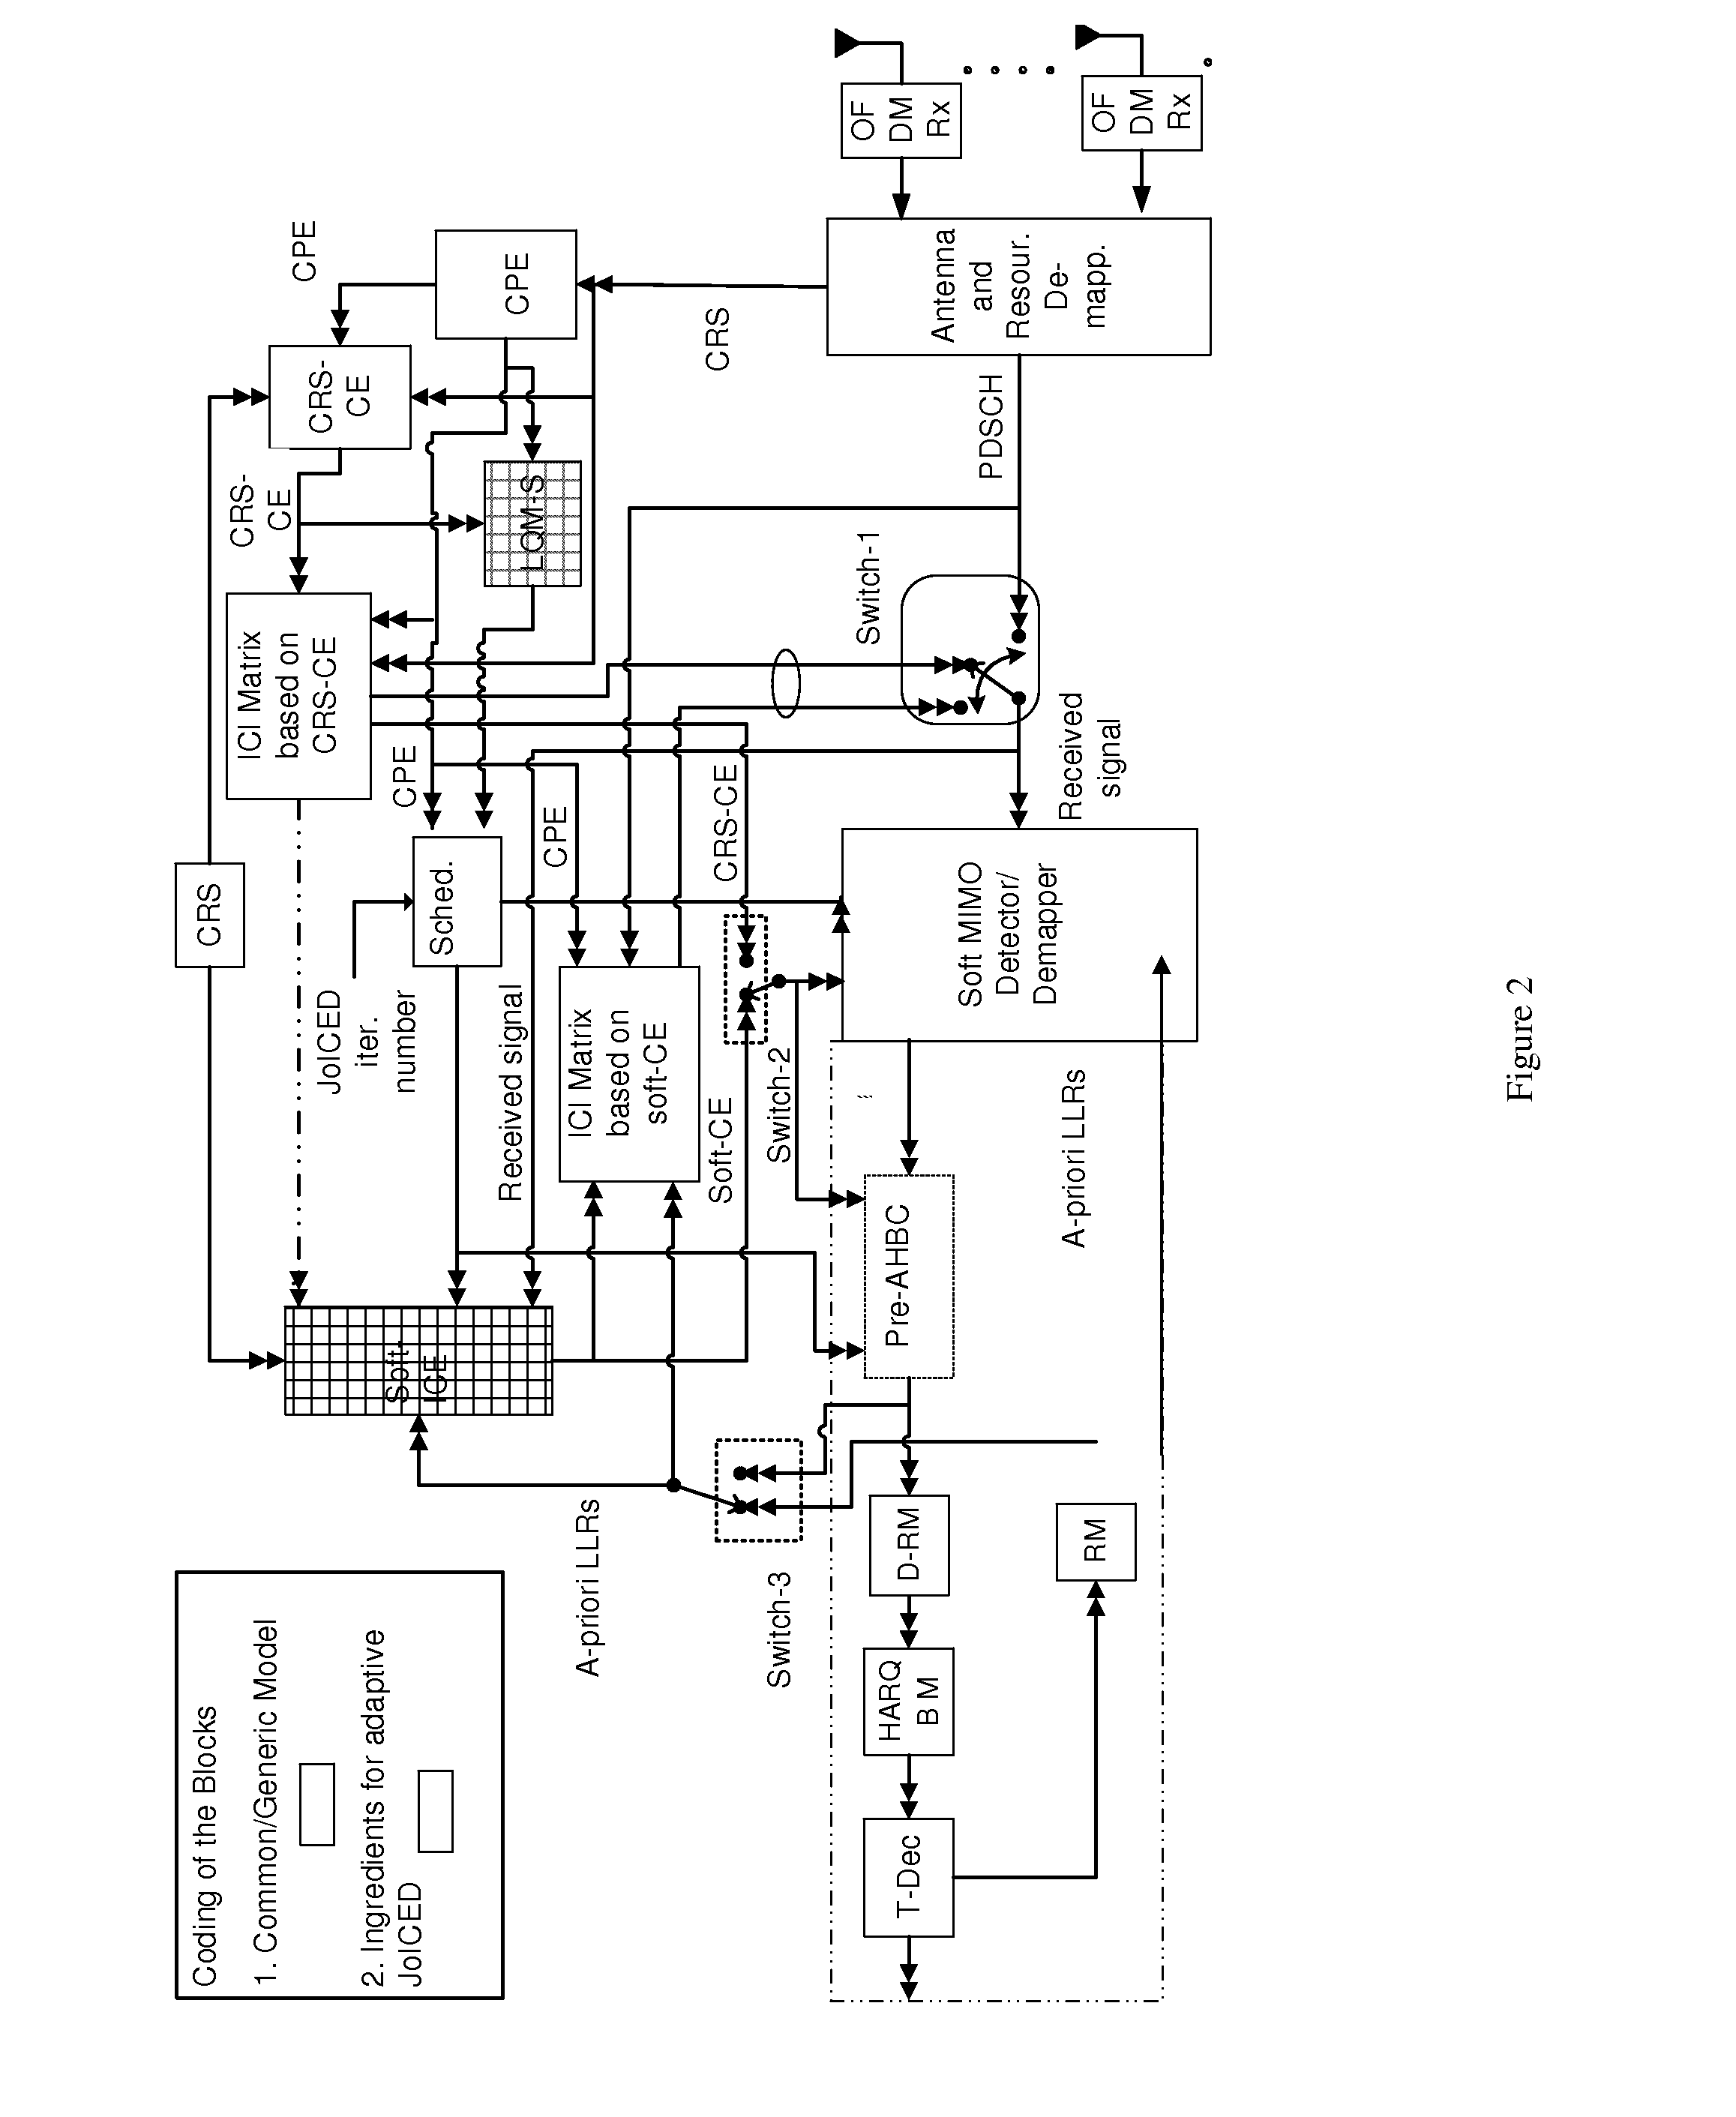 Methods and Nodes in a Wireless Communication Network